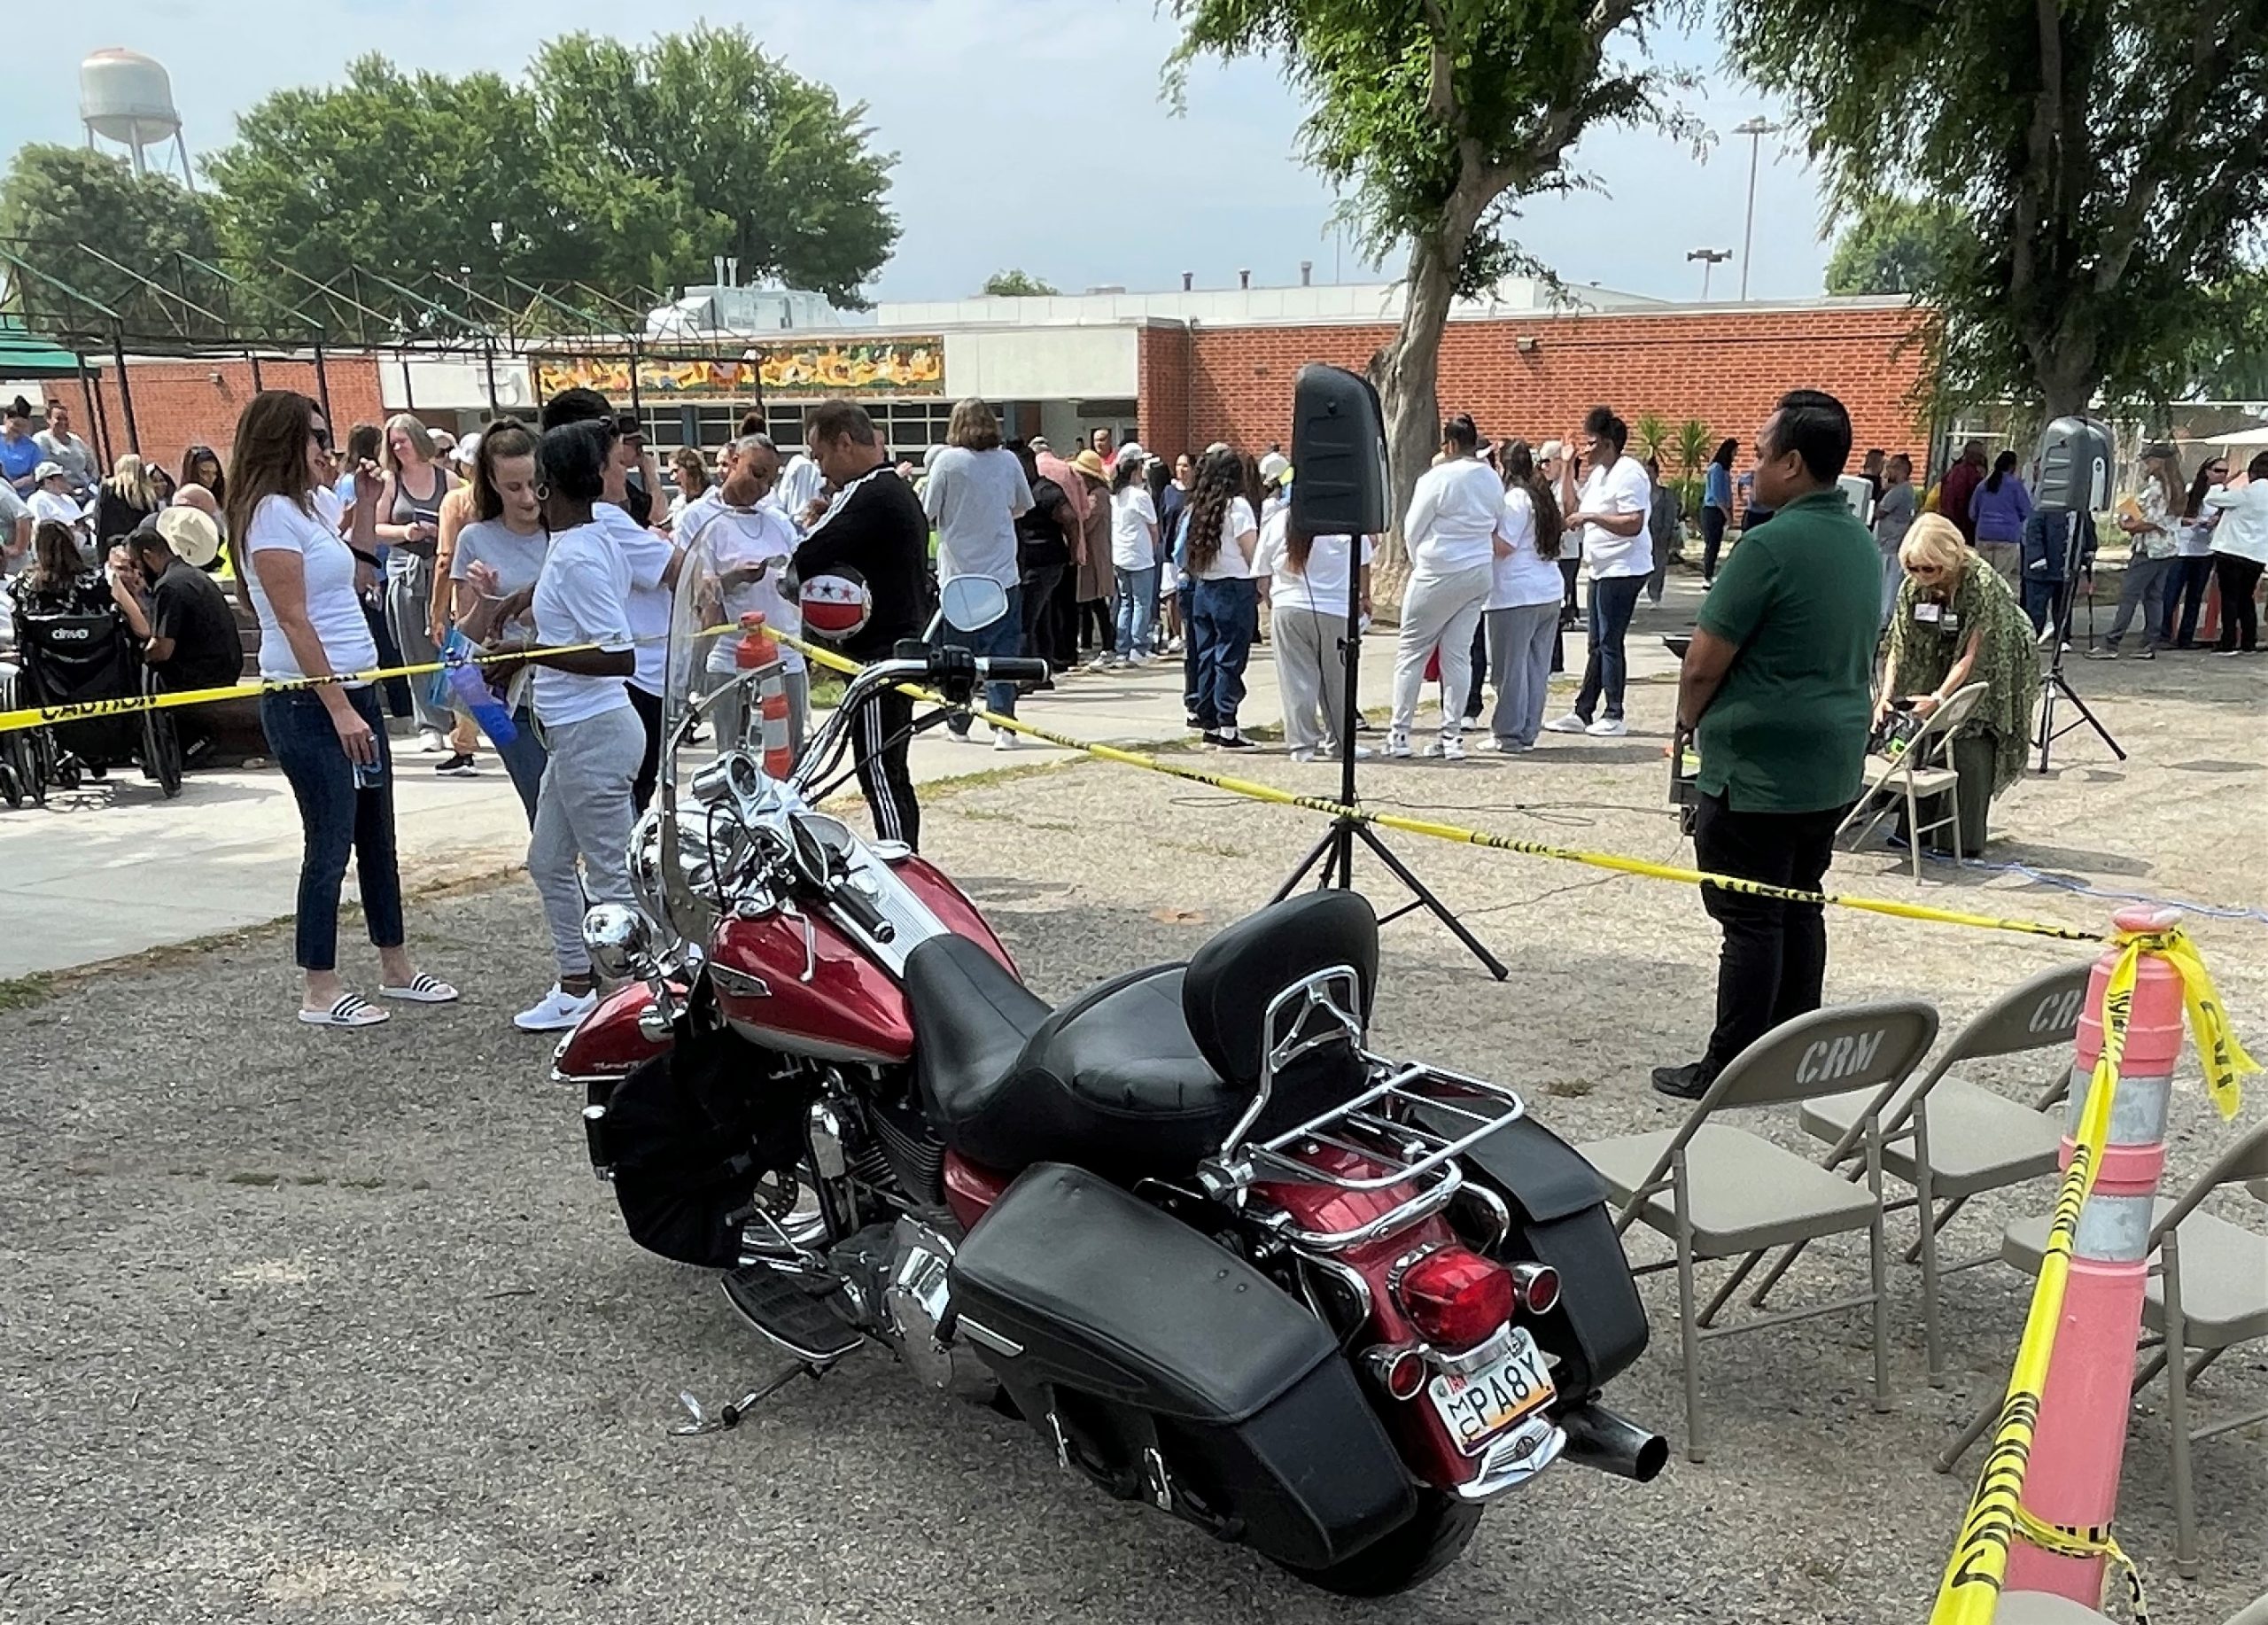 Motorcycle with incarcerated people at California Institution for Women (CIW).